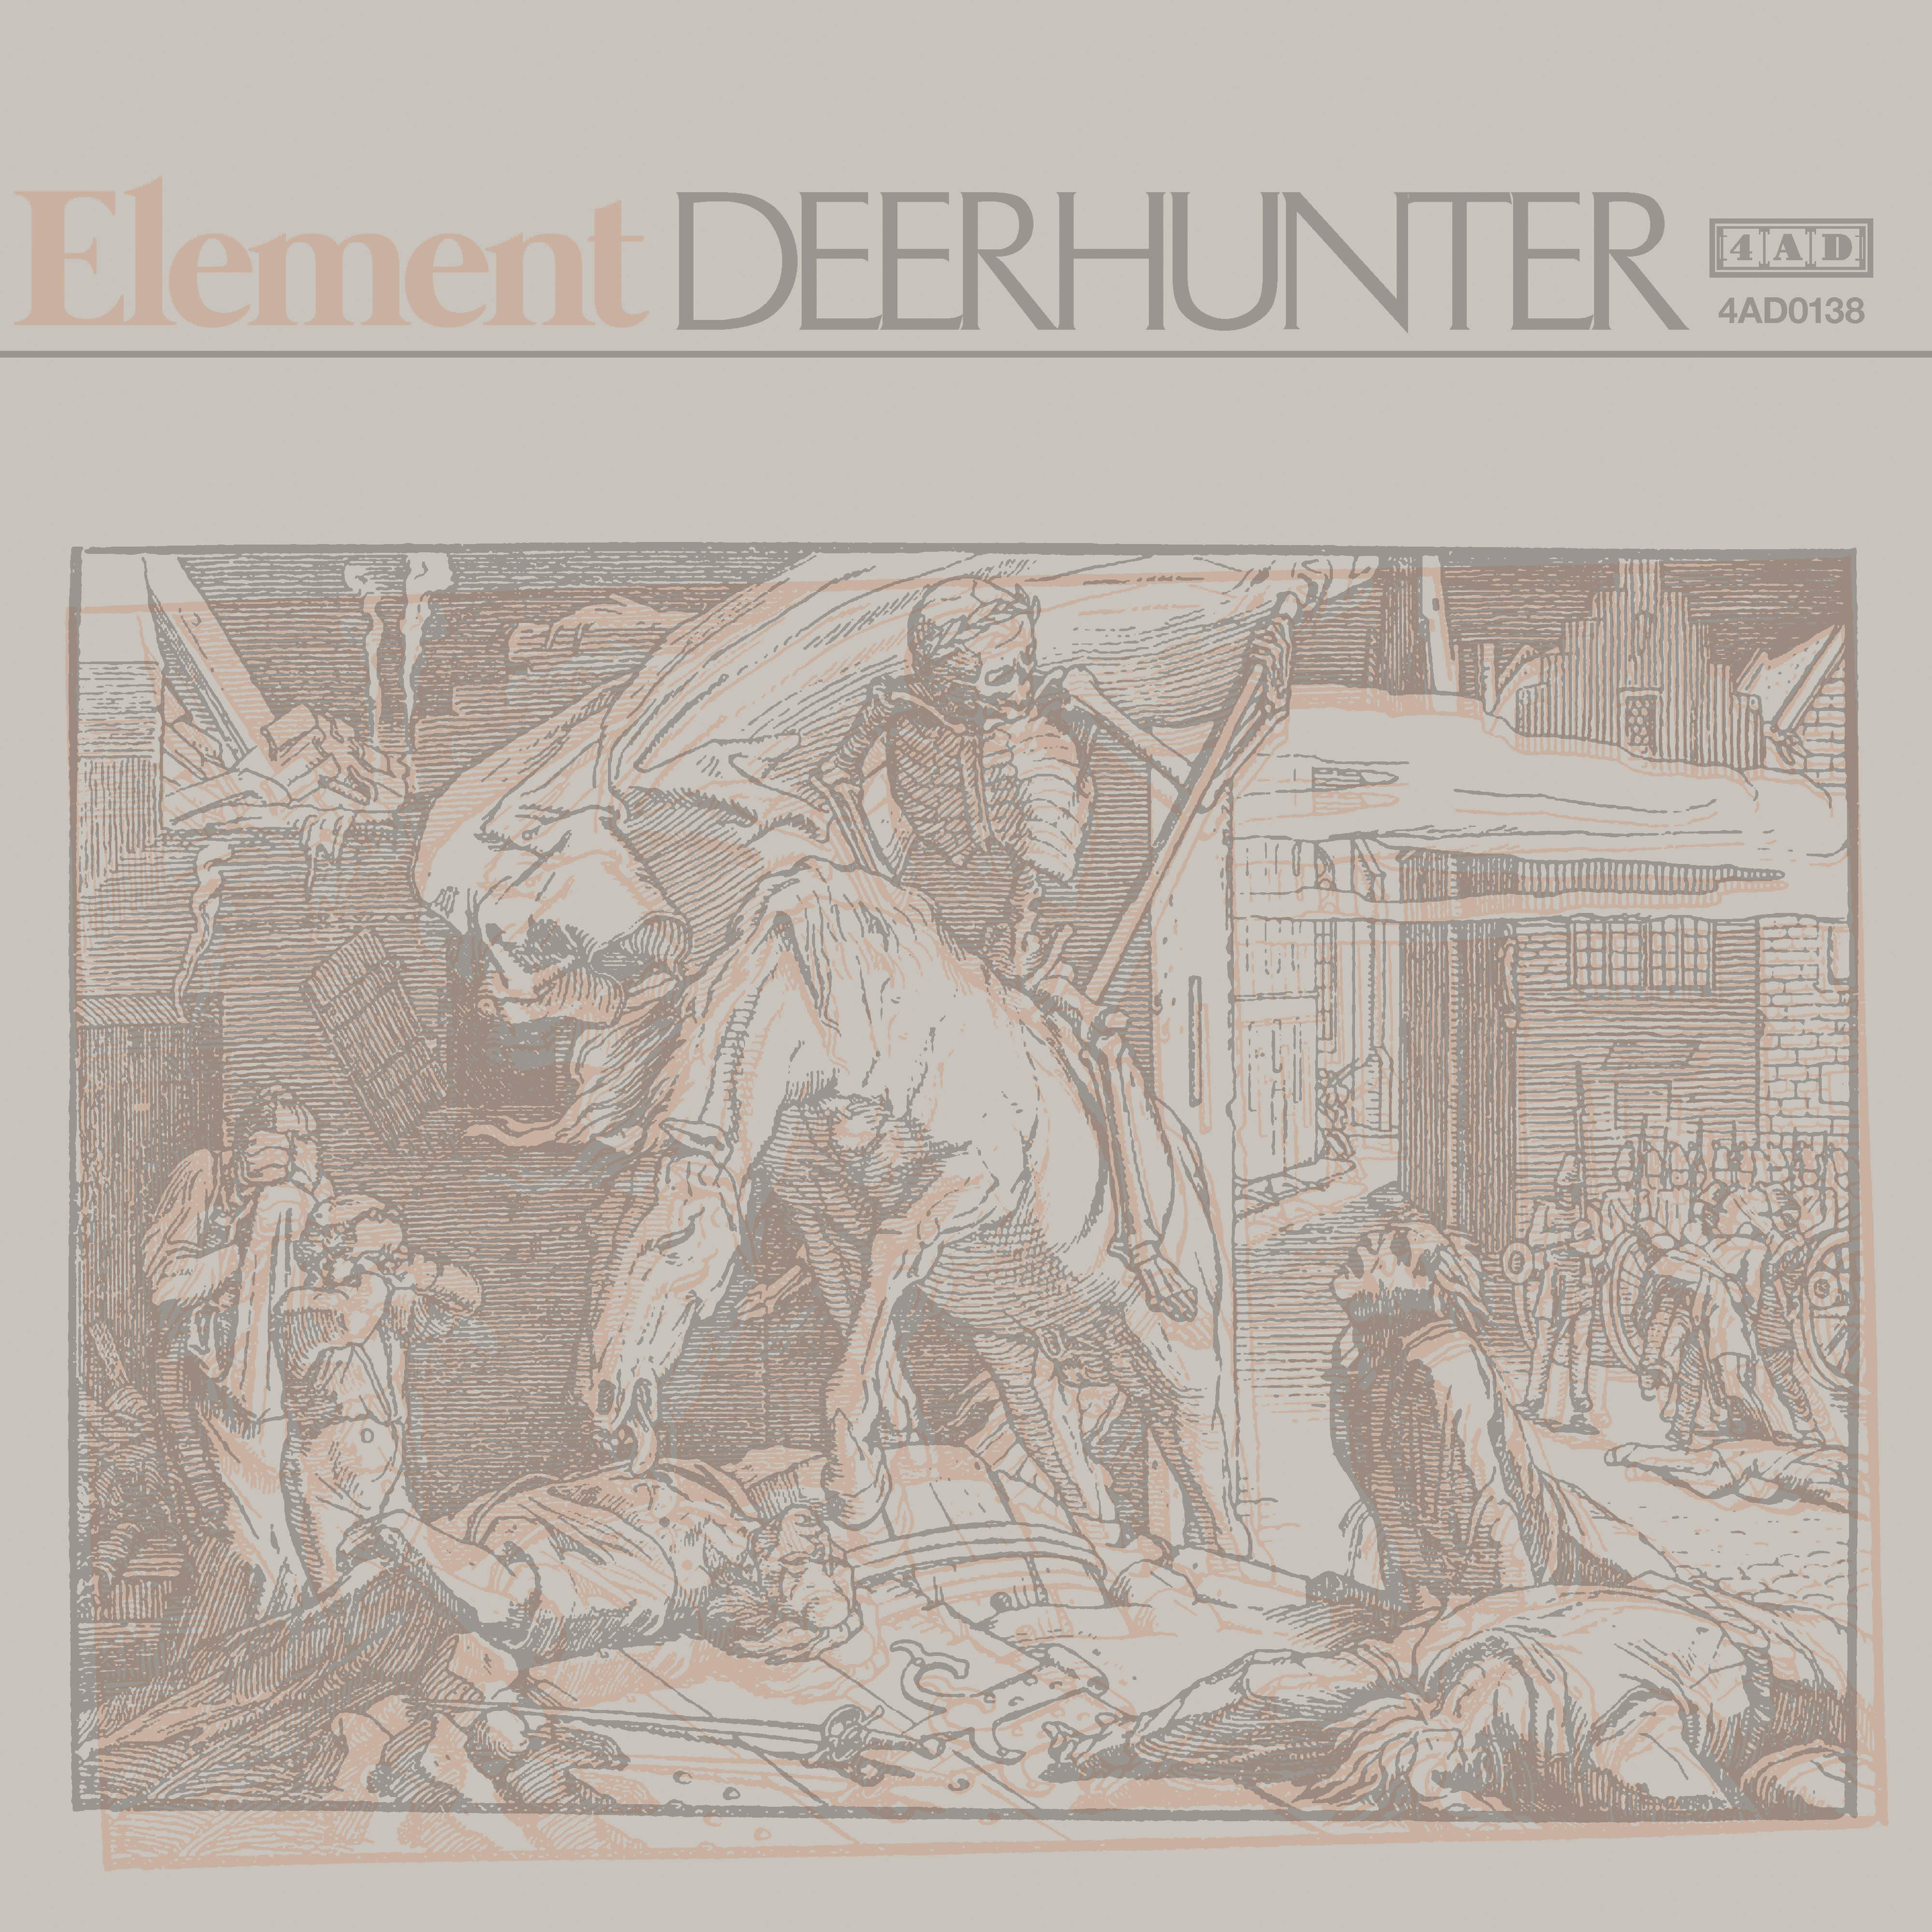 Atlanta band and 4AD recording artists Deerhunter, have shared another singlr "Element", off their new LP Why Hasn’t Everything Already Disappeared?